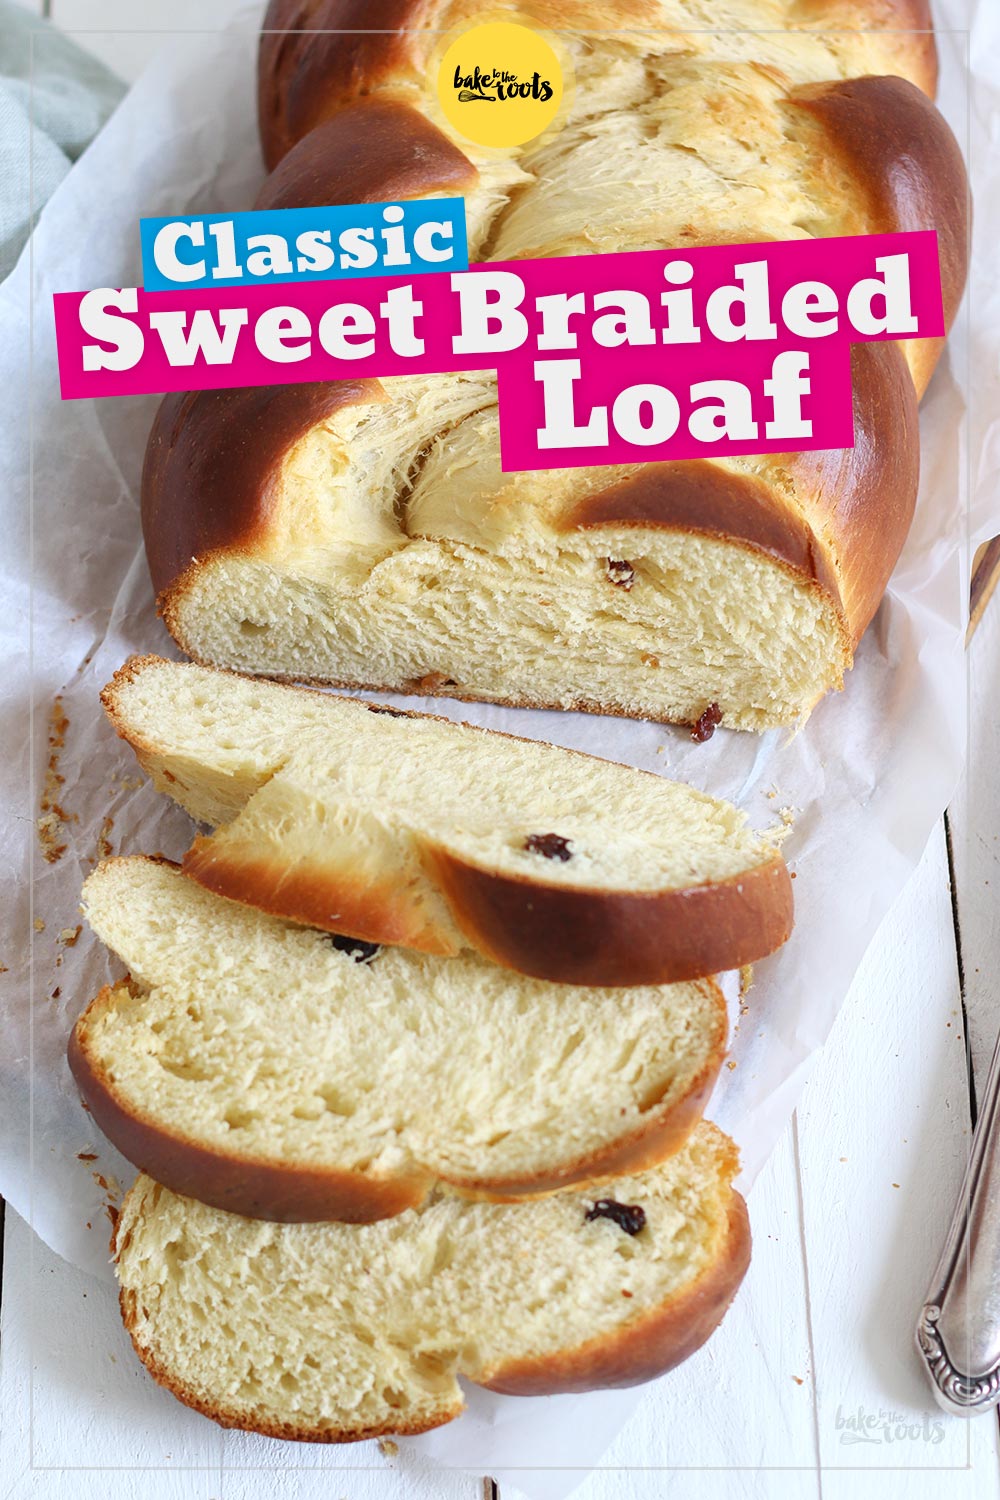 Classic Sweet Braided Loaf | Bake to the roots